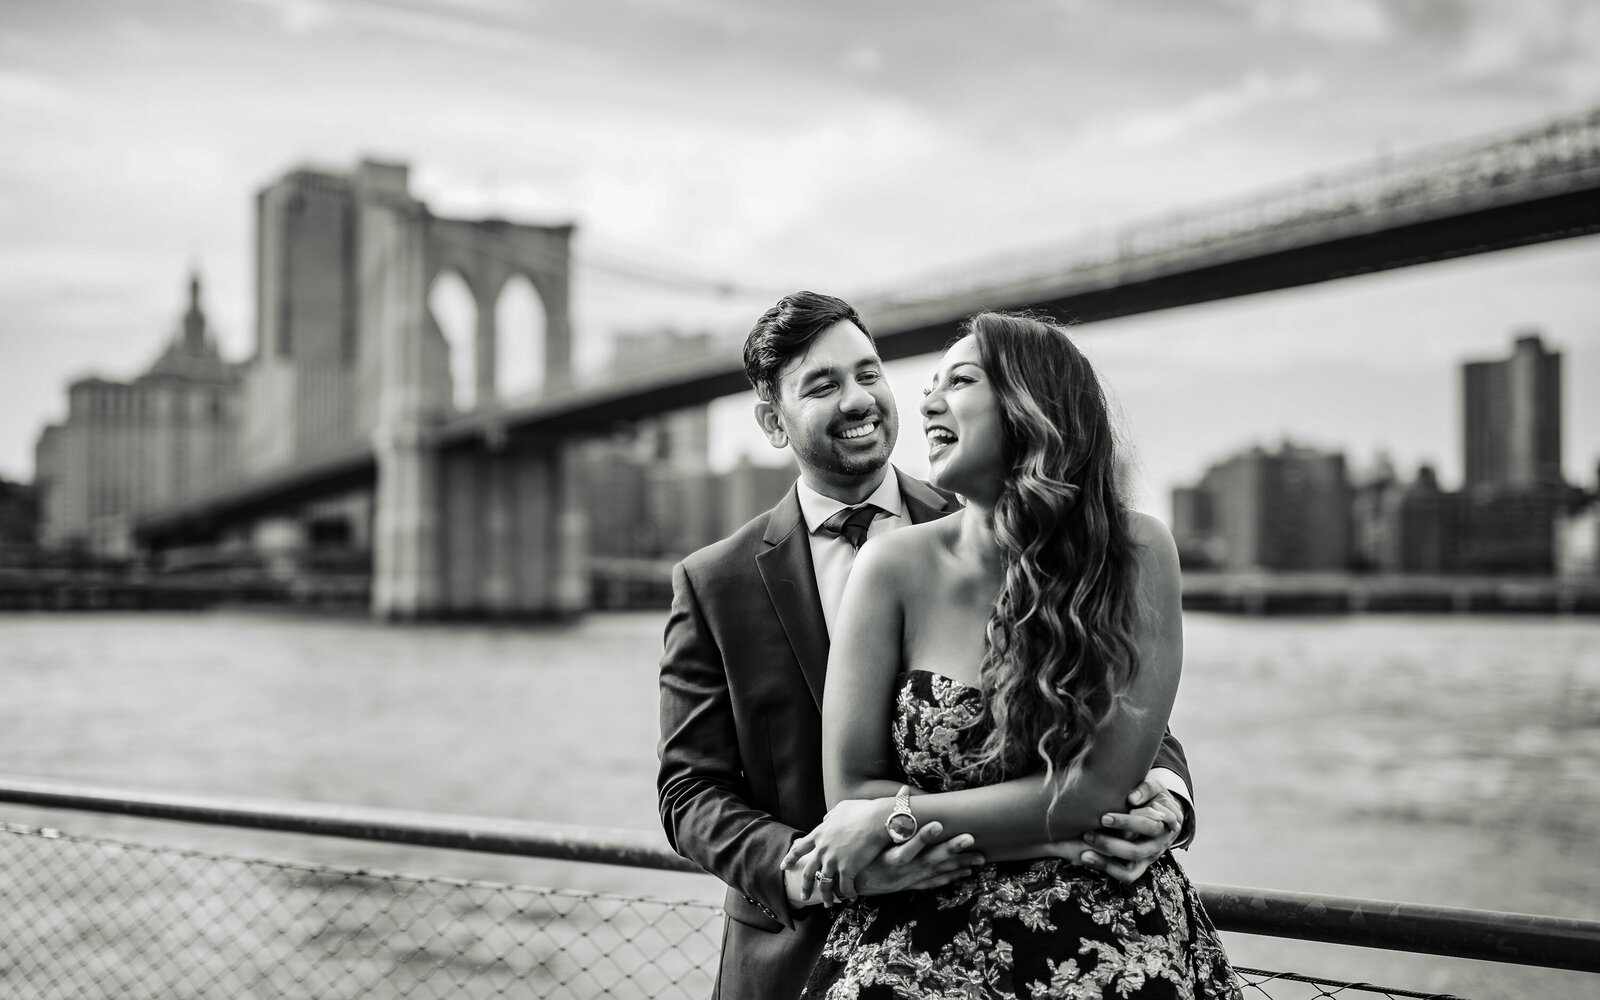 Looking for a NYC engagement photographer? Contact Ishan Fotografi for a free consultation.